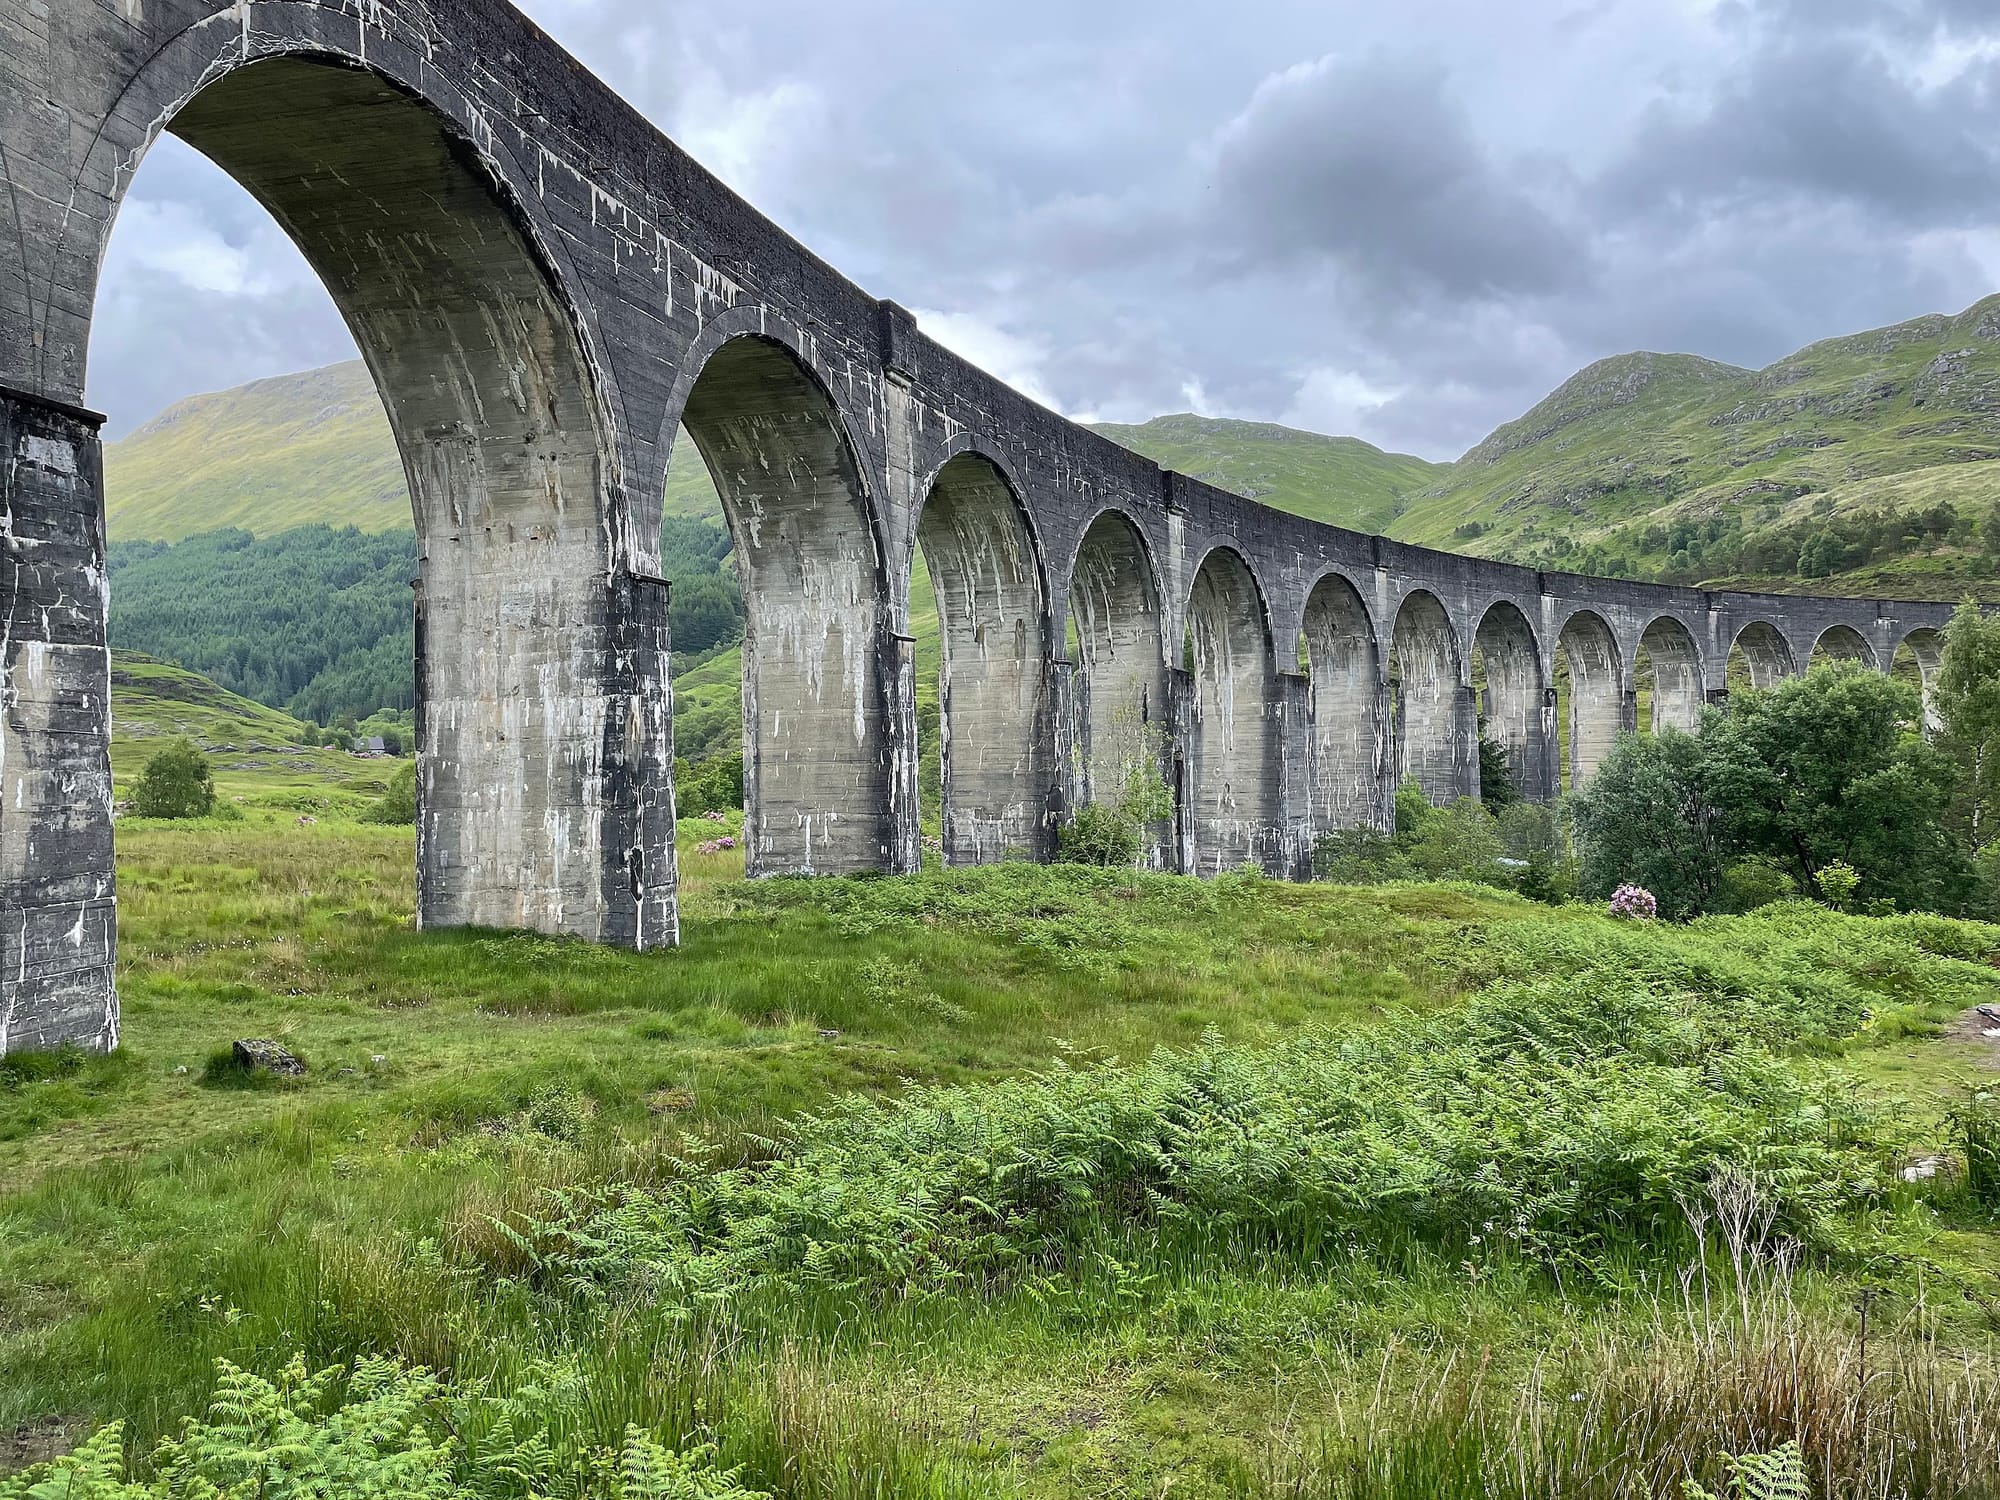 A view from the ground of Glenfinnan viaduct with multiple arches stretching across a lush green landscape with hills in the background on an overcast day.